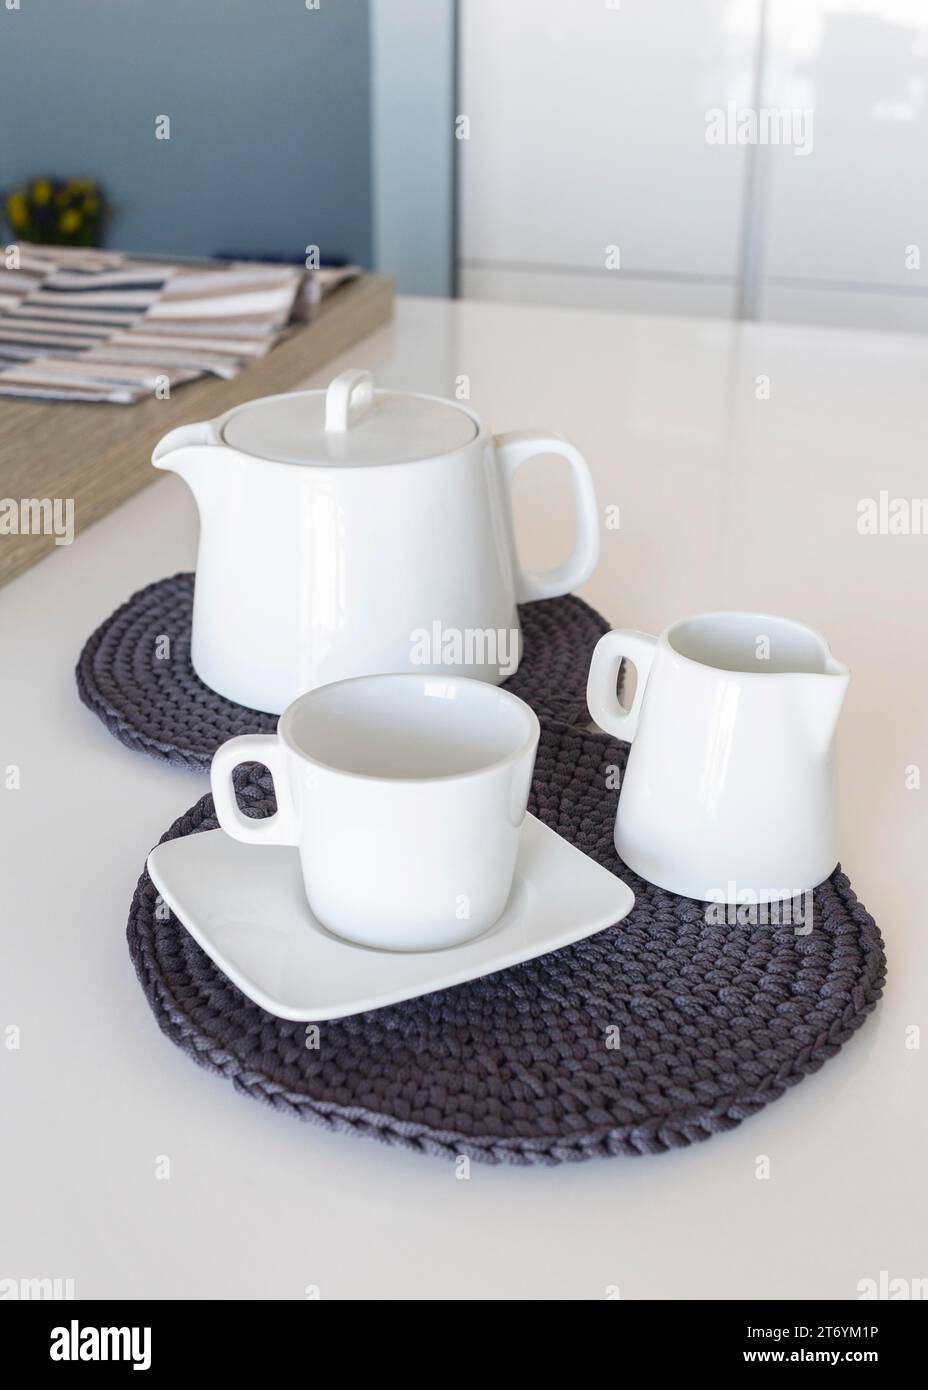 Knitted table wear kitchen Stock Photo